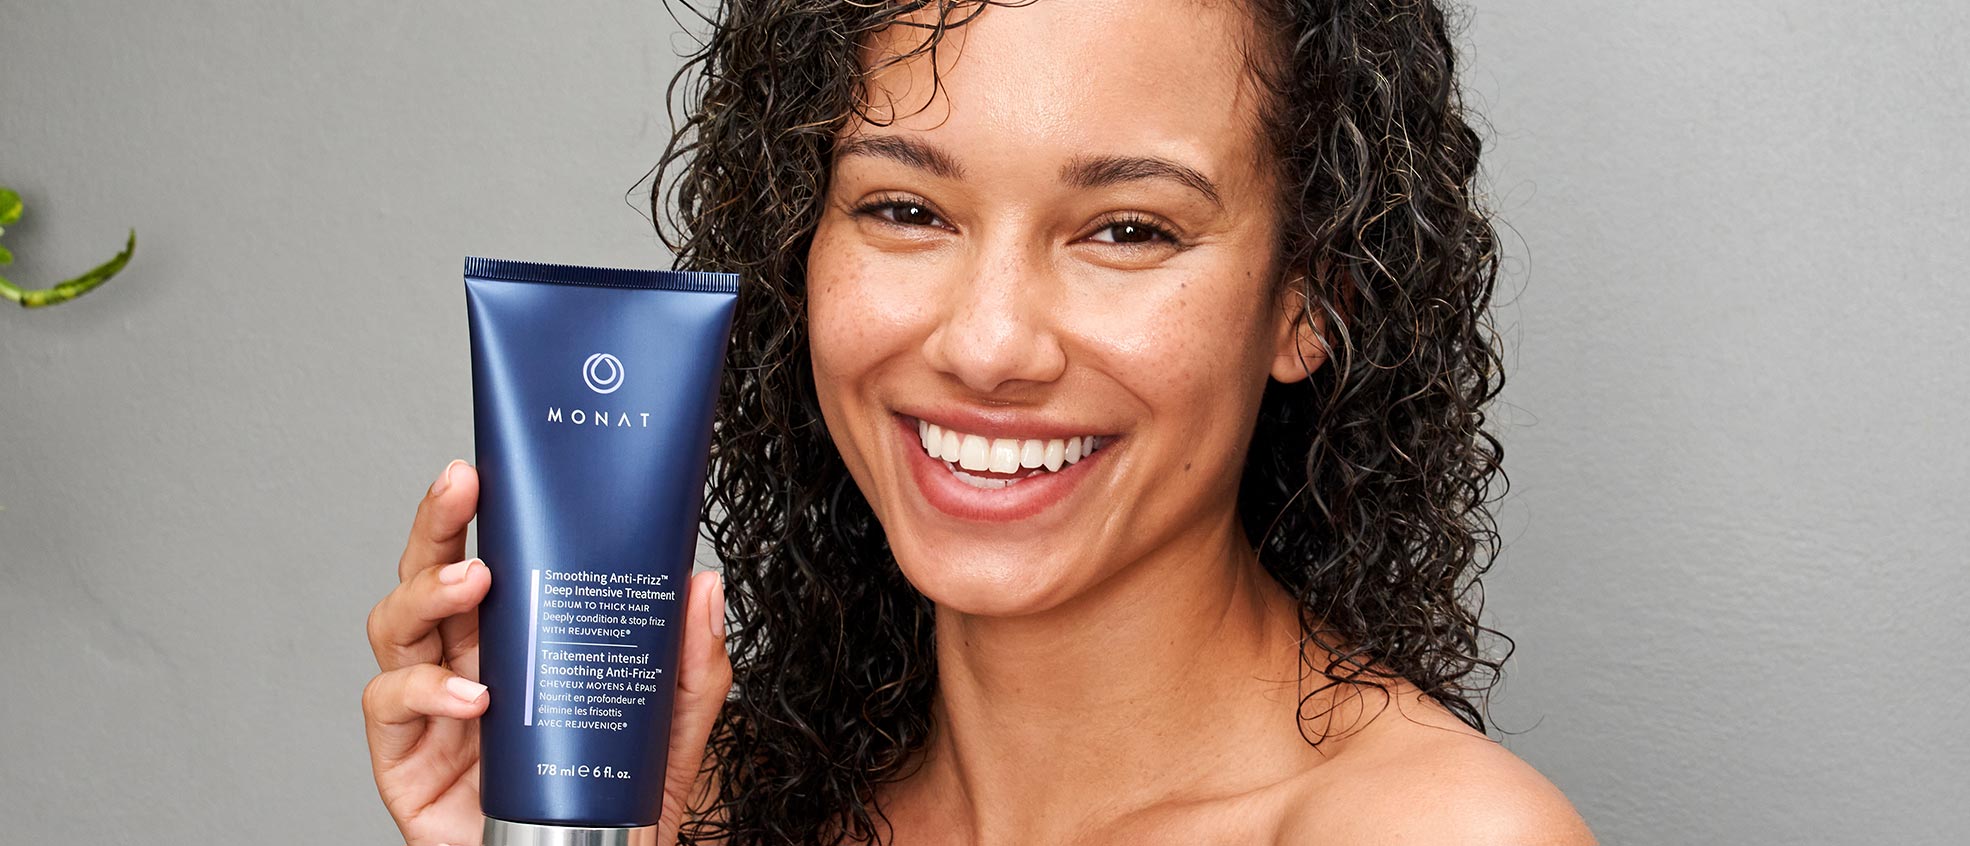 Brunette woman with curly hair smiling while holding Smoothing Anti-Frizz™ Deep Intensive Treatment.